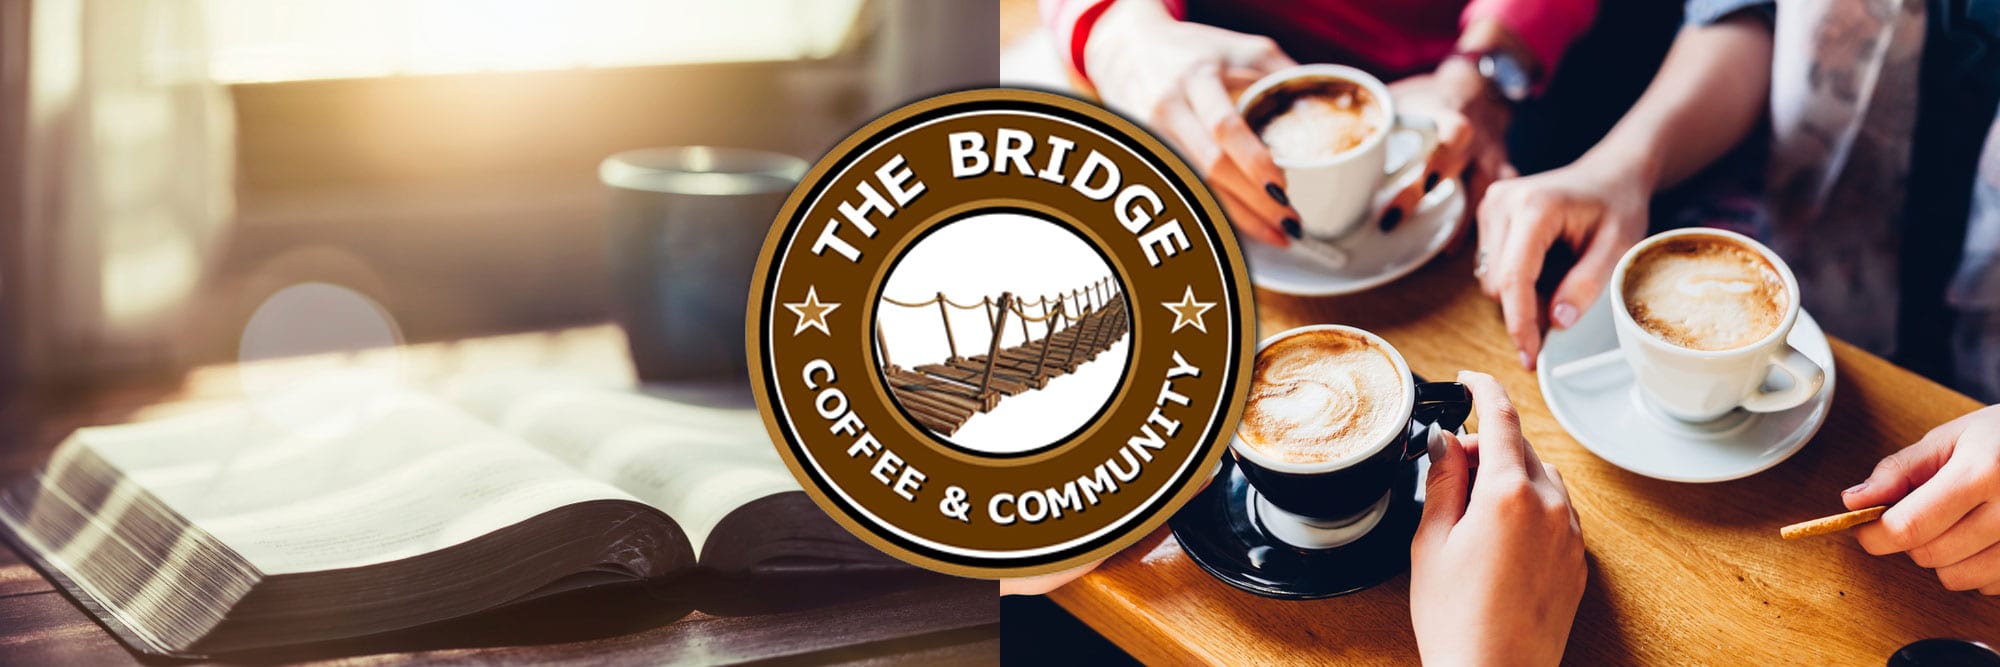 the bridge logo over a bible and coffee cups